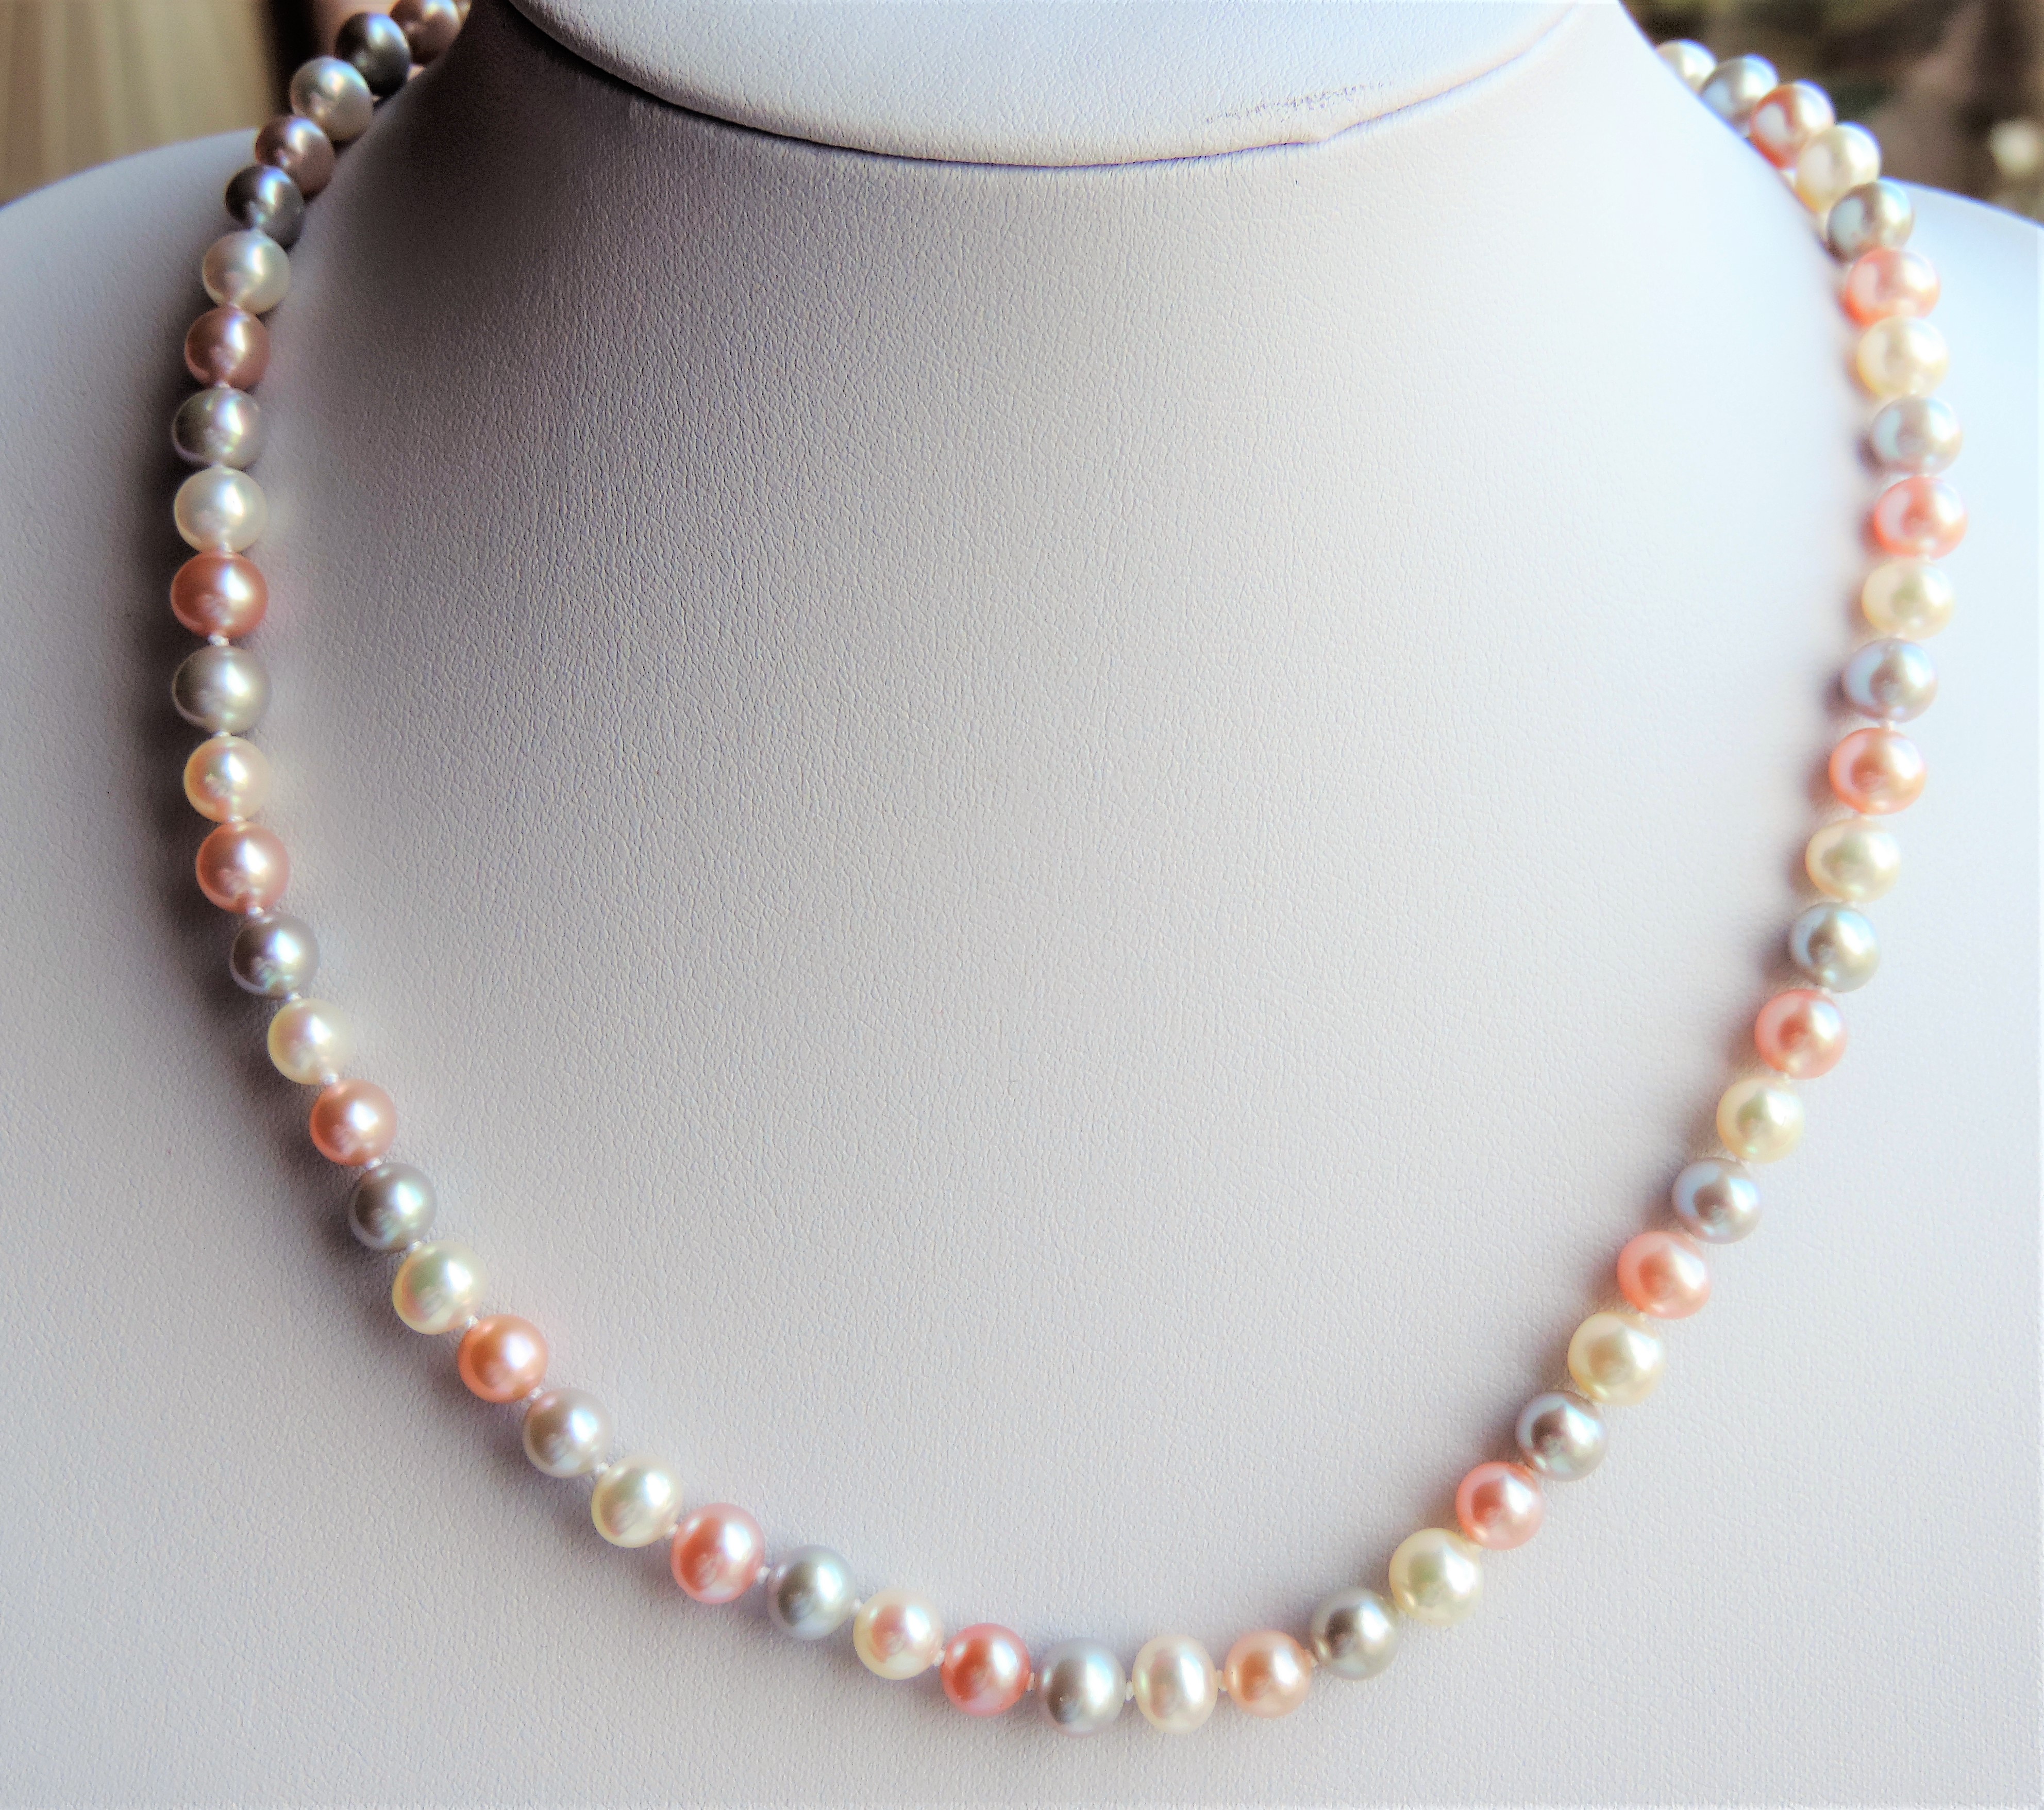 Luxury Freshwater Multicolour Cultured Pearl Necklace - Image 5 of 5